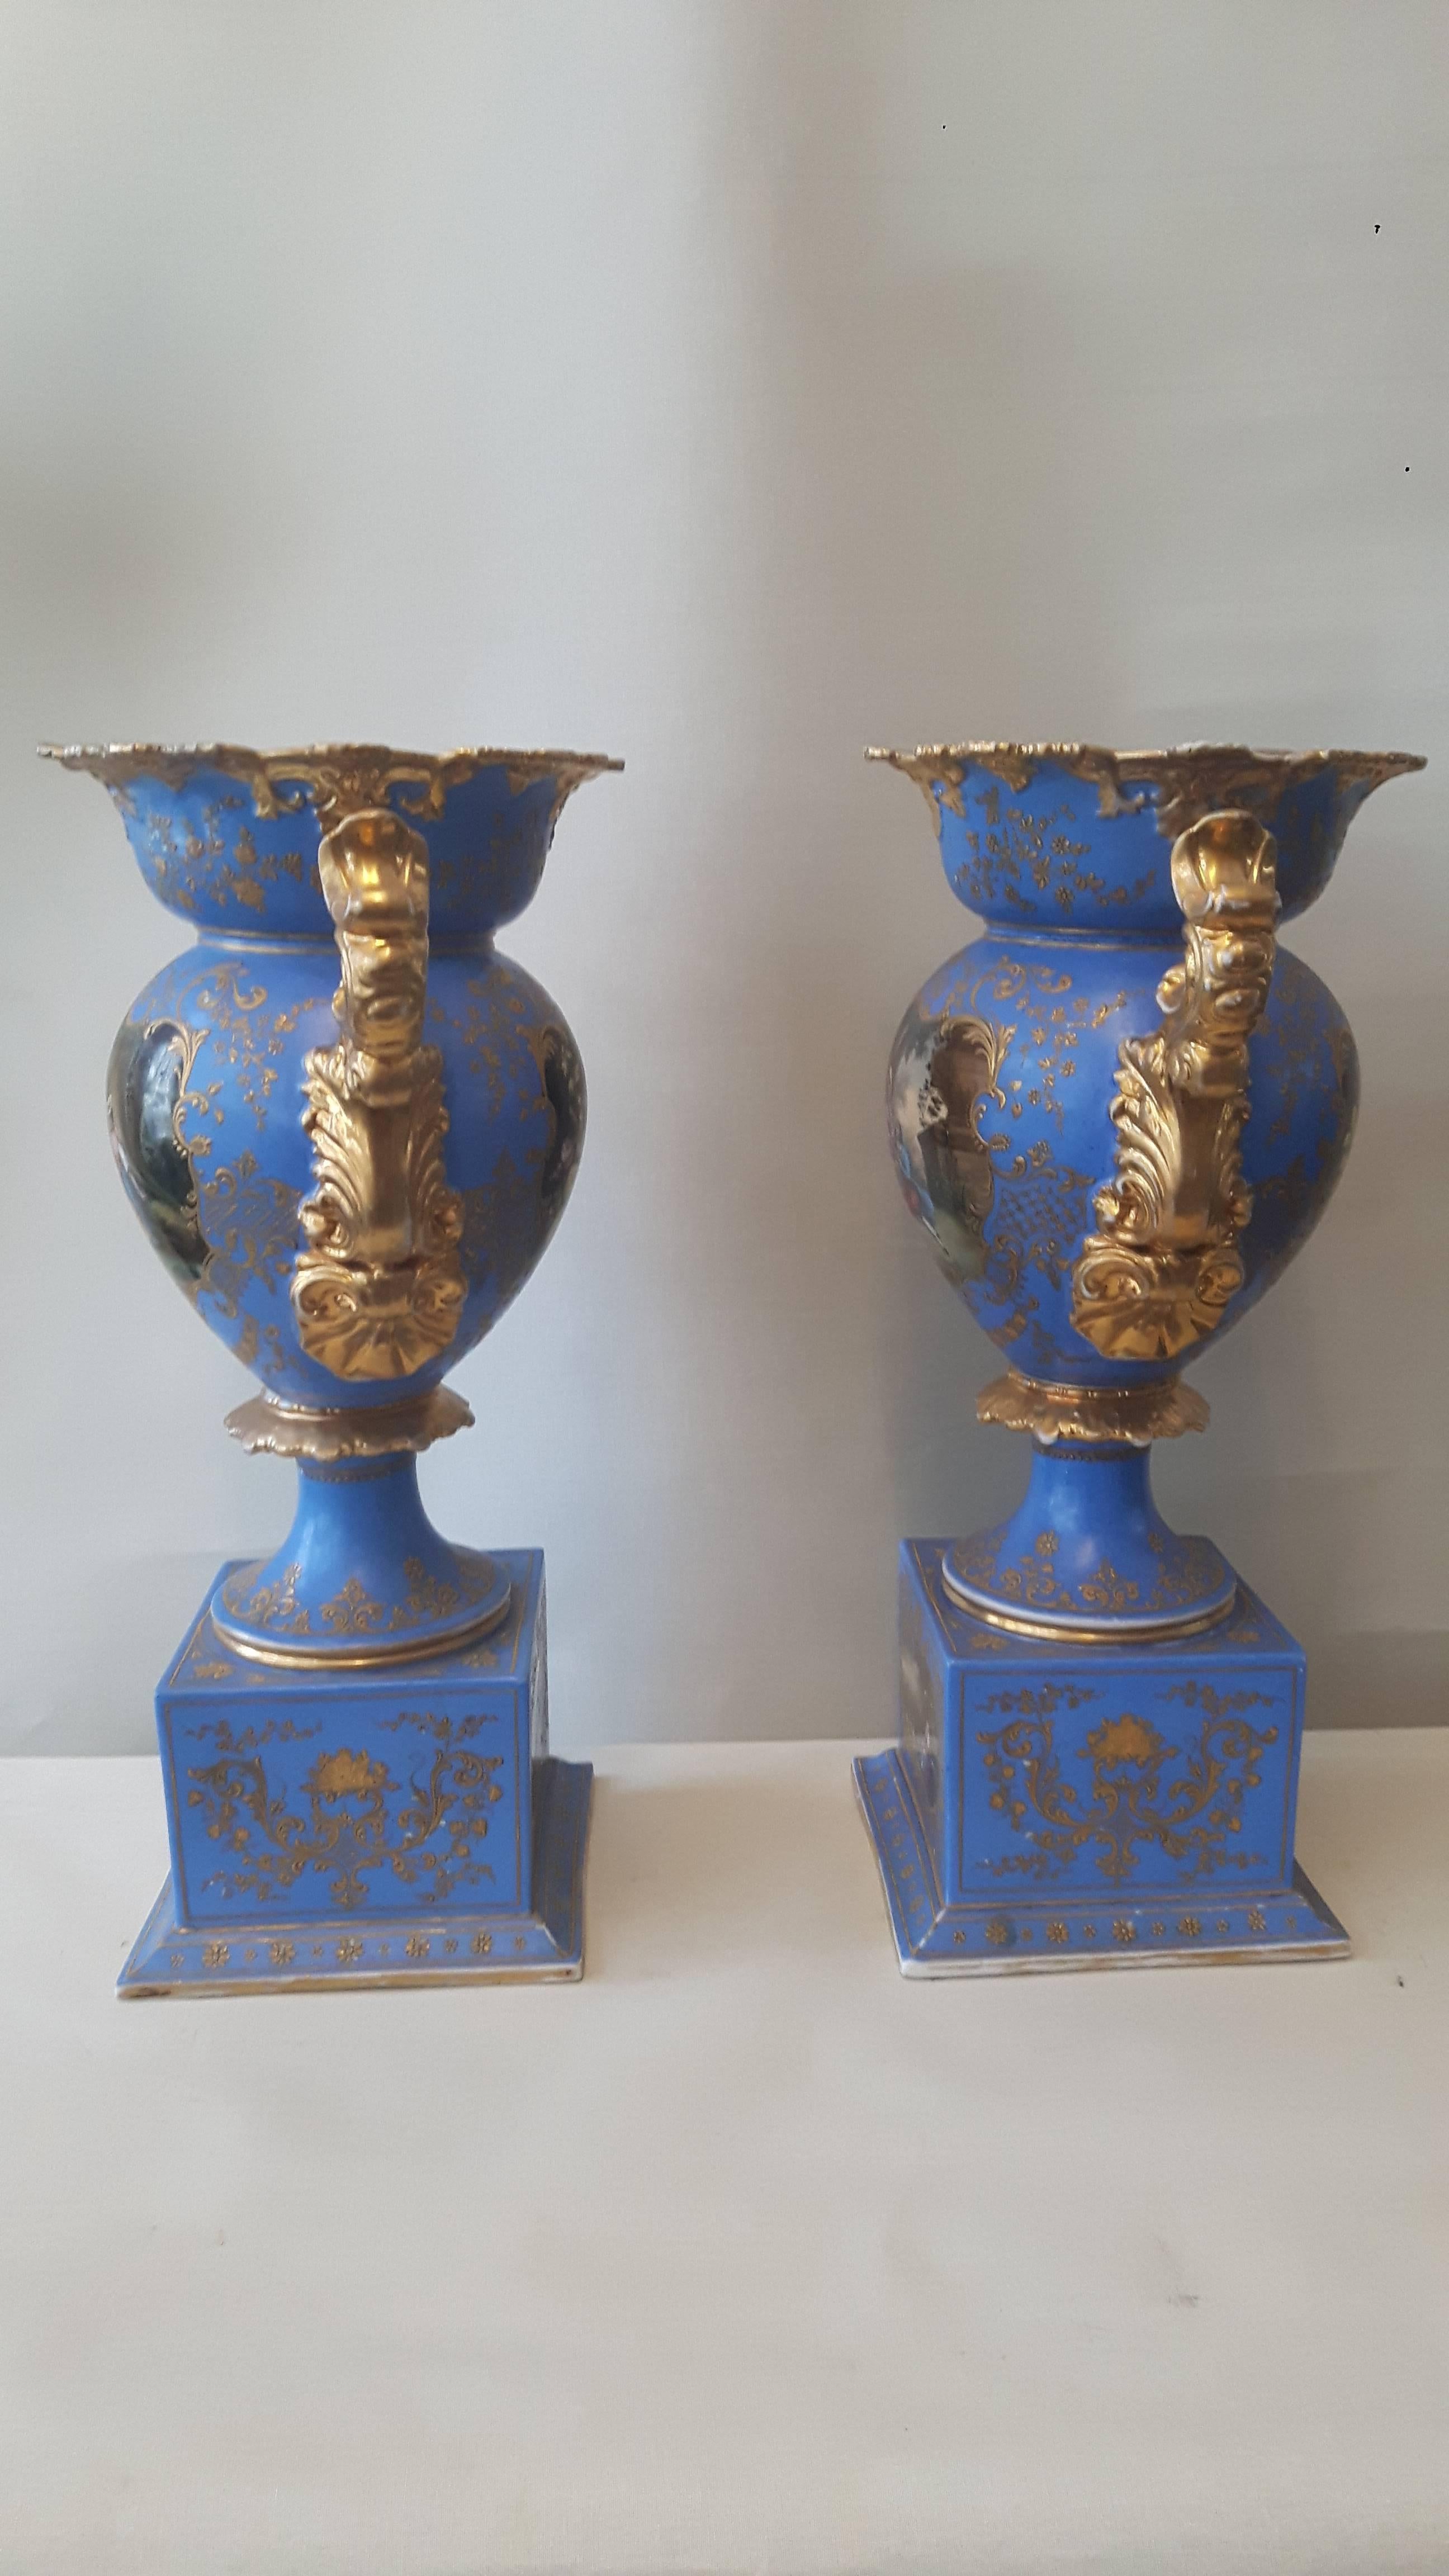 A pair of Napoleon III mantelpiece vases in the eighteenth century style, elaborately decorated and gilded on a :bleu de ciel: background. Each vase is decorated with two panels, one with elegant bouquets of flowers, the other with Watteau-style